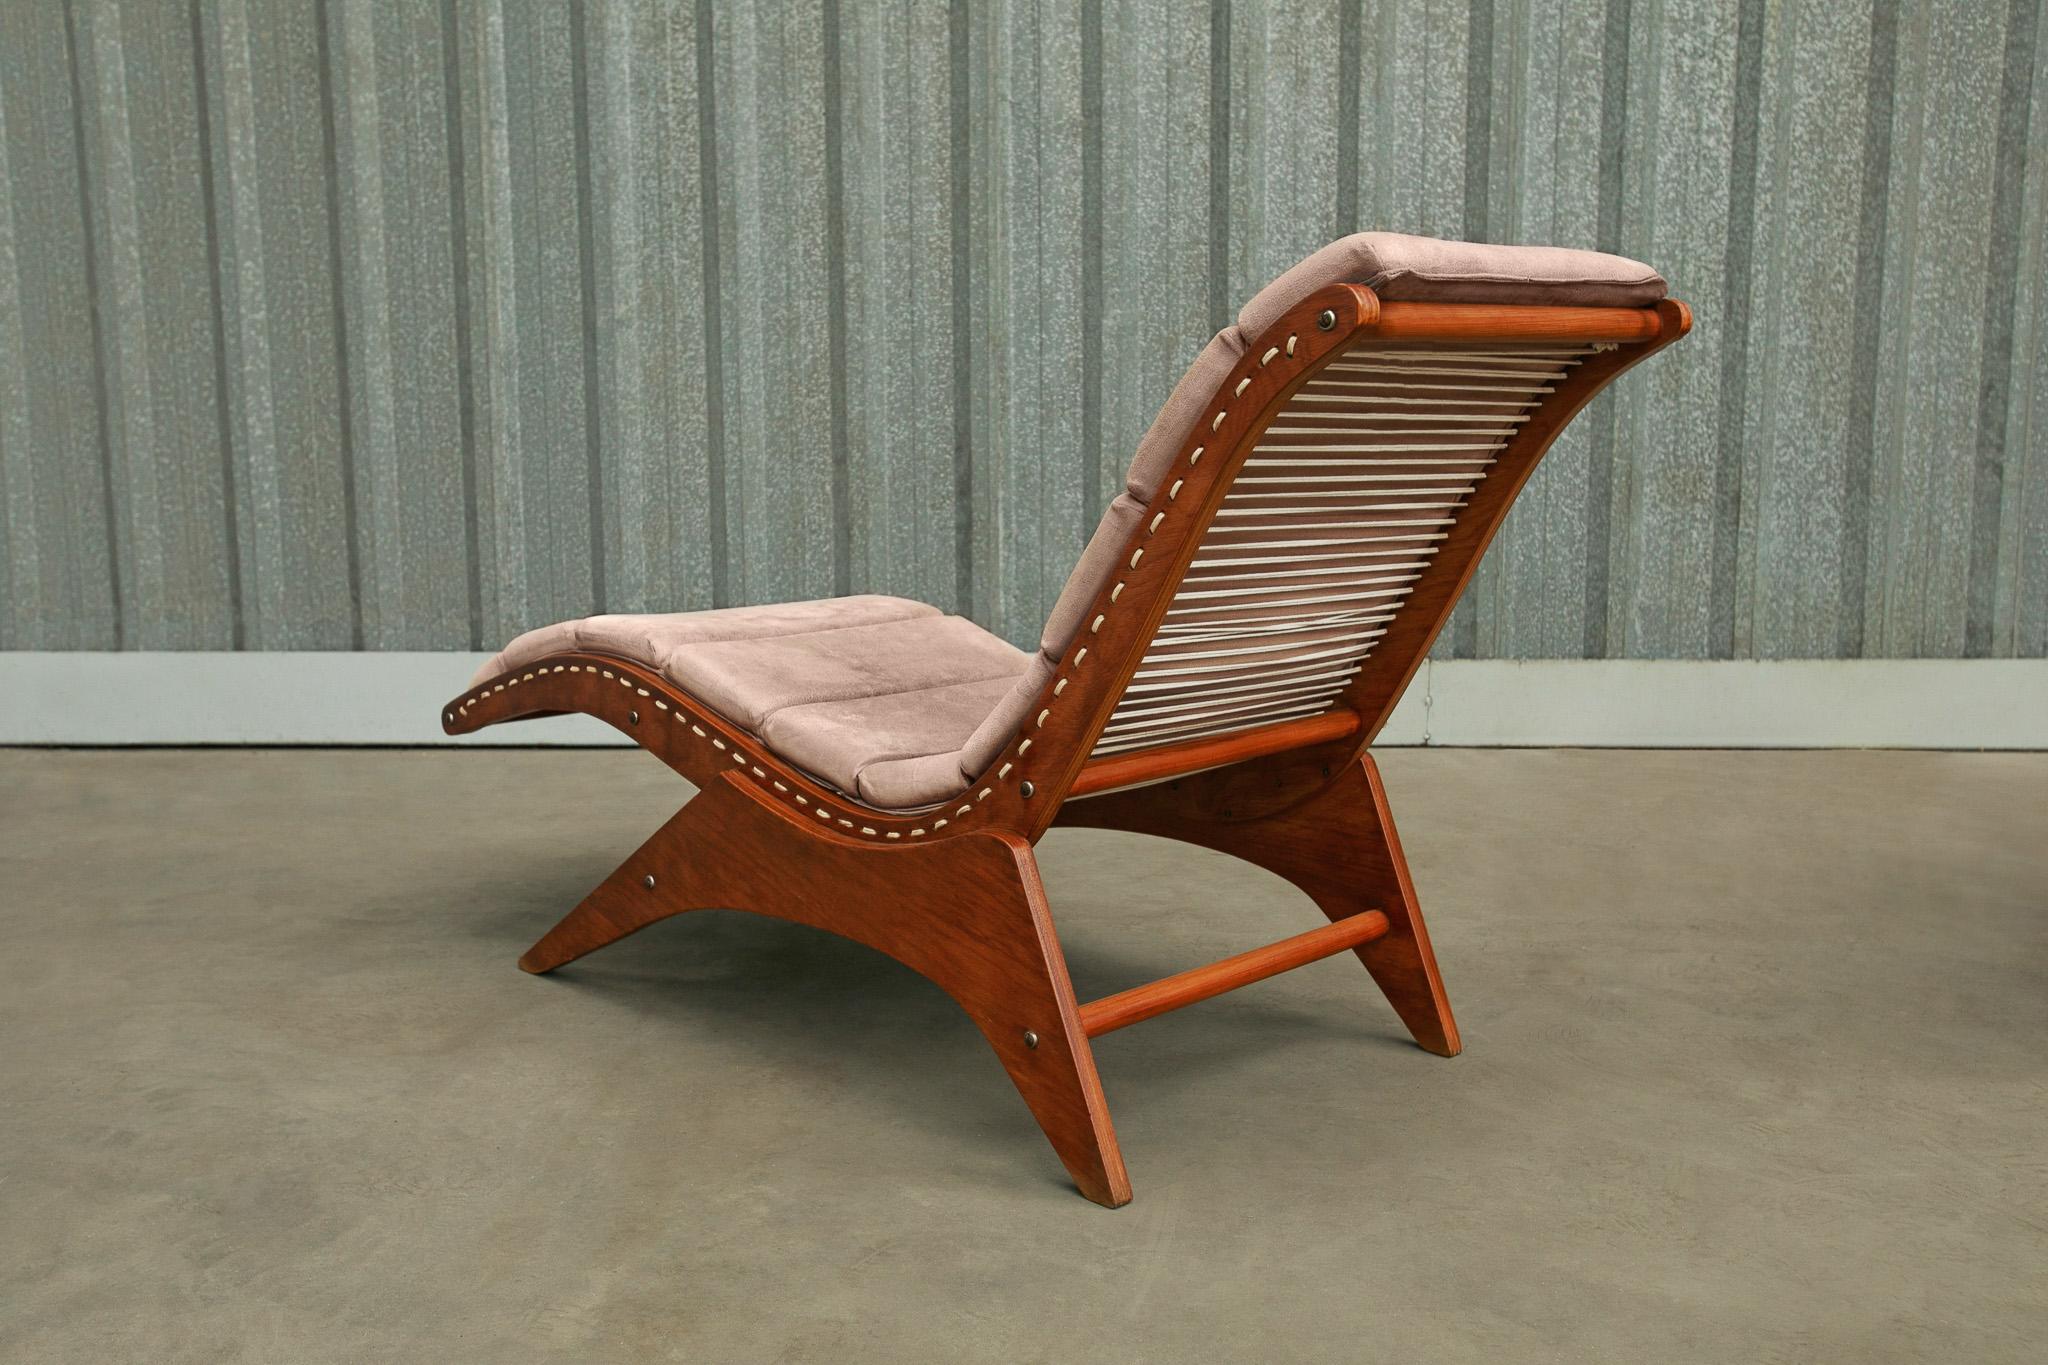 Available right now, this Brazilian modern iconic chaise lounge in marina plywood, cord, and fabric, designed by Jose Zanine Caldas for Moveis Z in the 50s, is nothing less than spectacular! The iconic piece is showcased in our showroom next to a